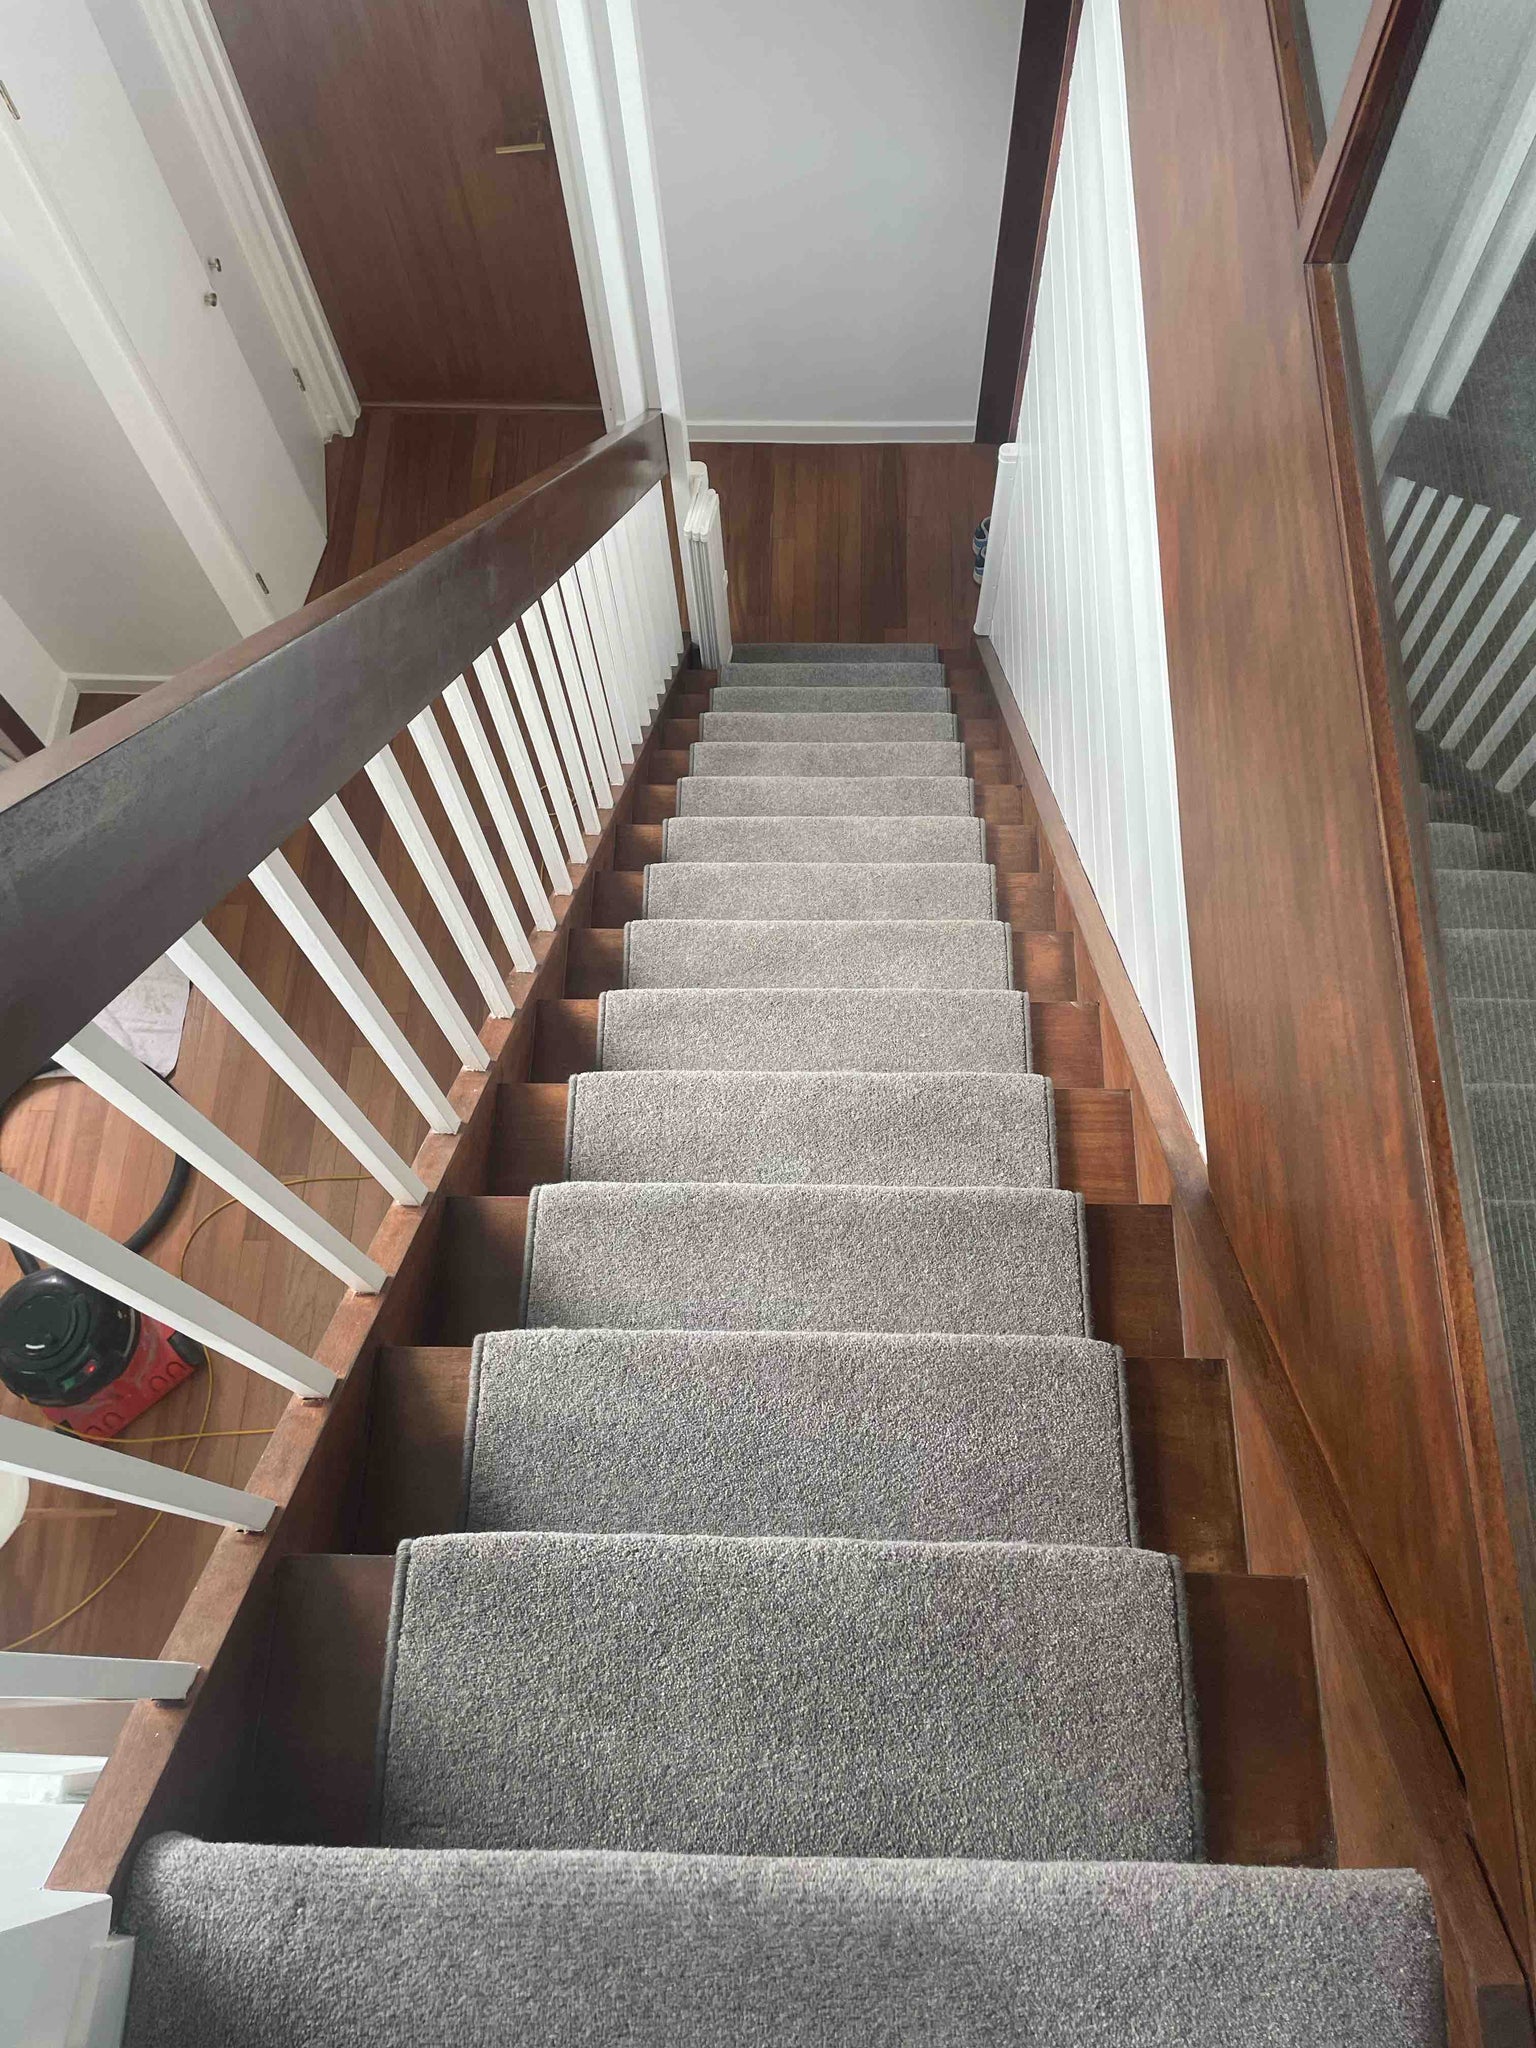 Carpet stair runner with whipped edge Cormar Apollo Plus